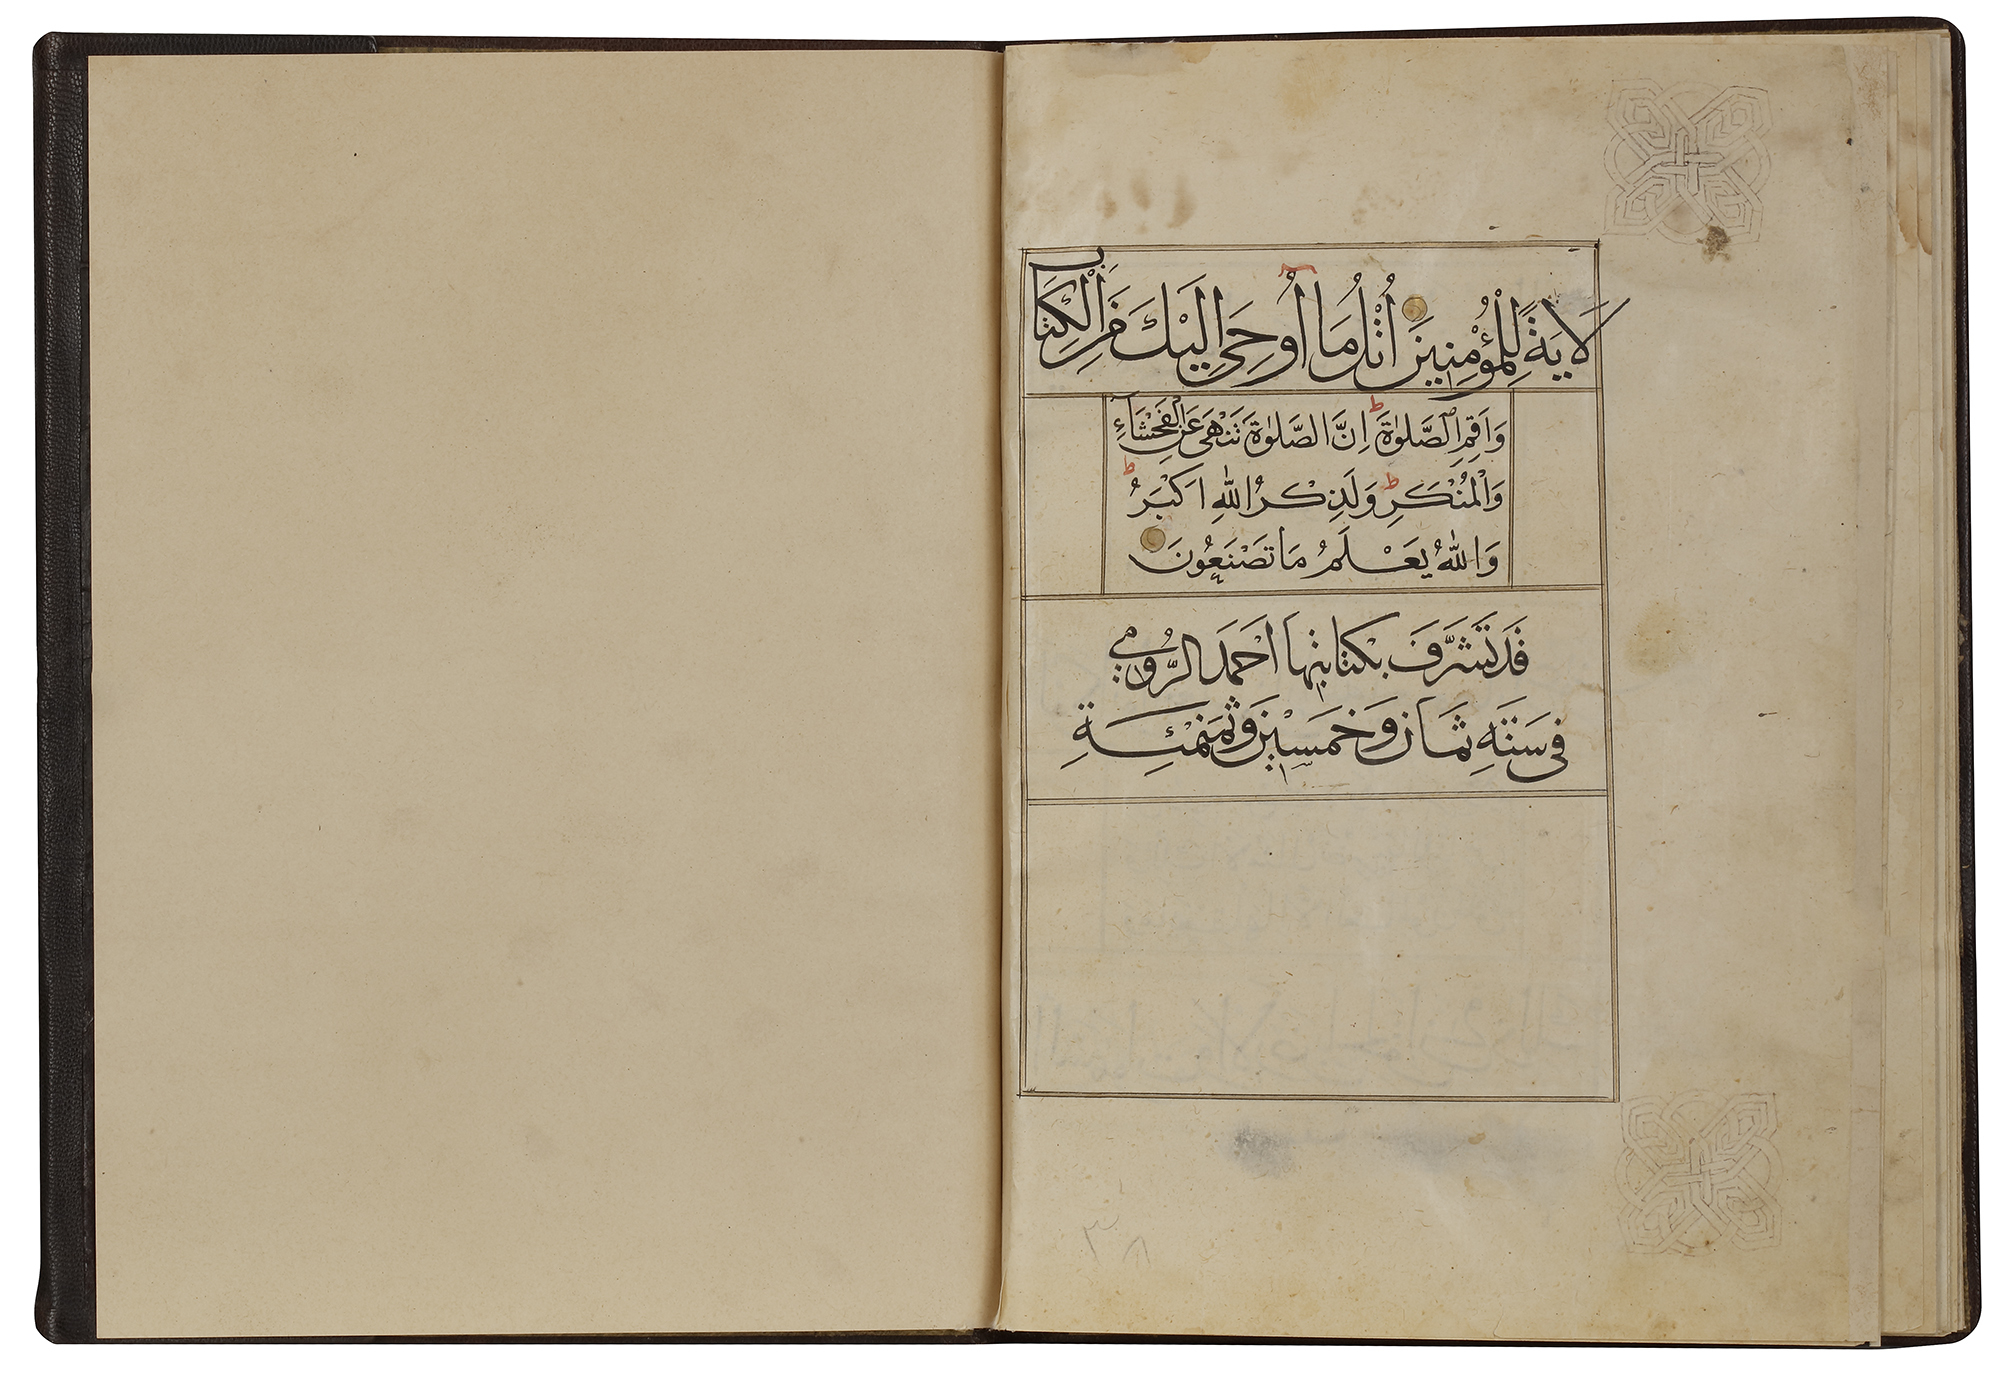 A LATE TIMURID QURAN JUZ, BY AHMED AL-RUMI IN 858 AH/1454 AD - Image 10 of 12